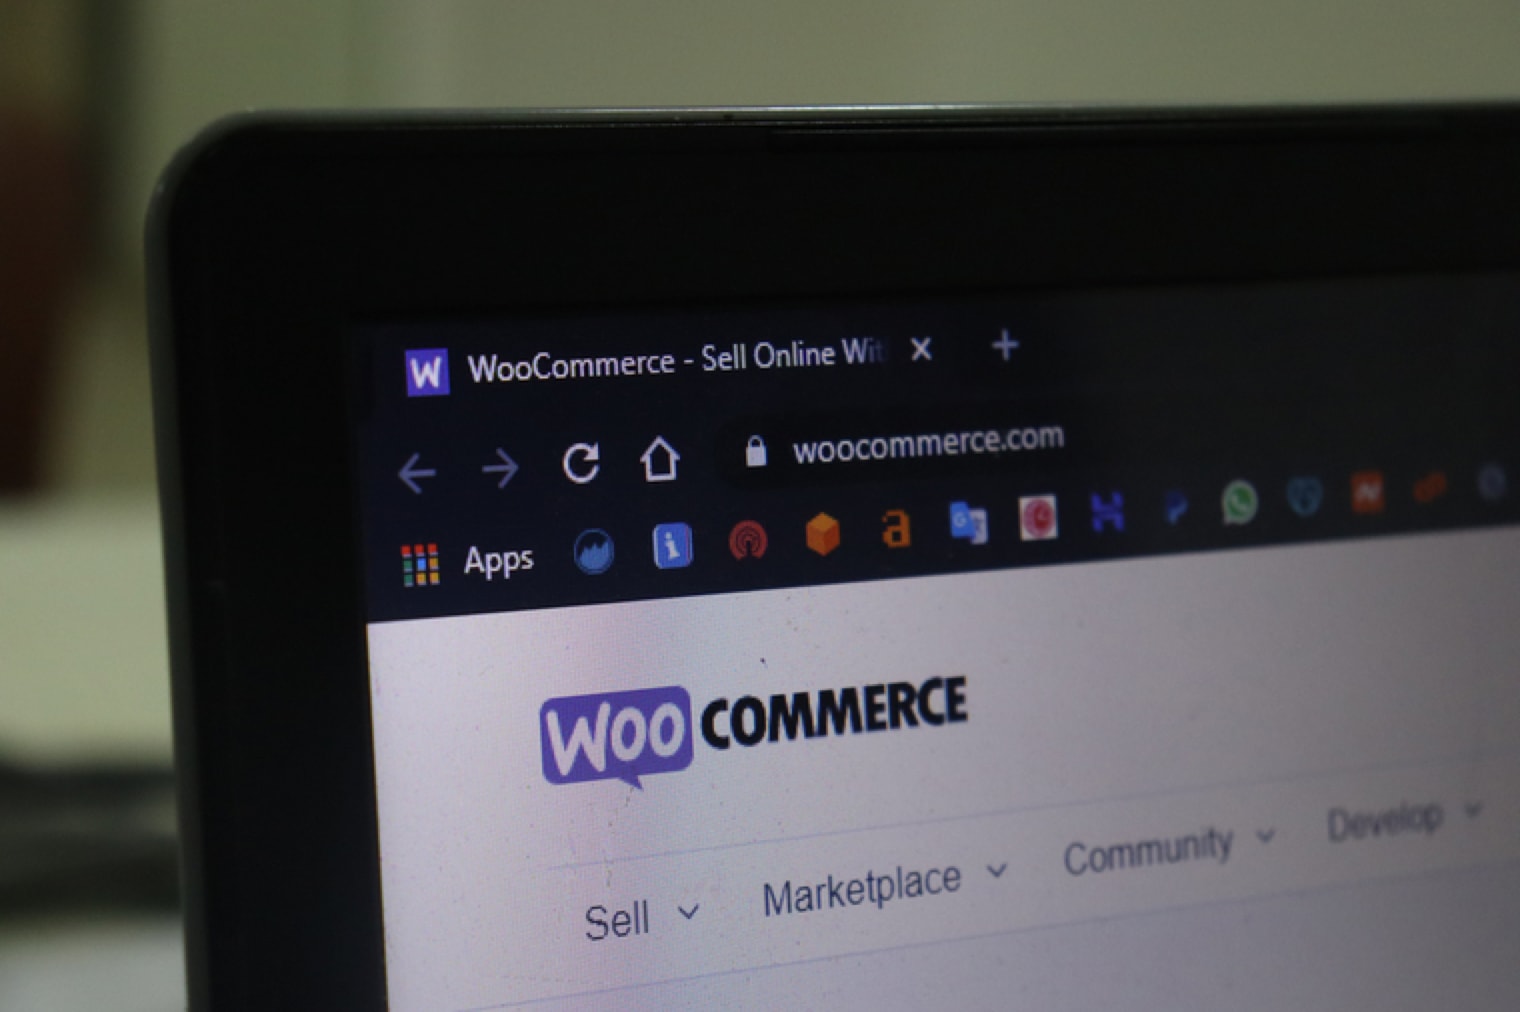 image of the woocommerce website open on a laptop screen